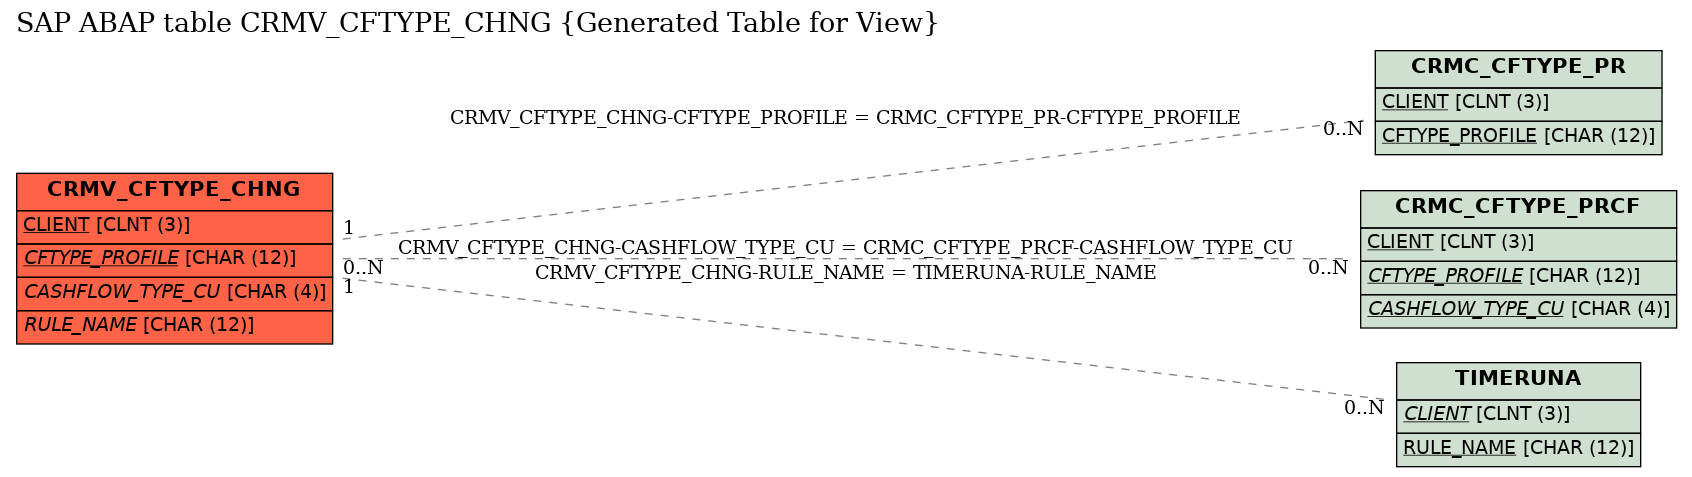 E-R Diagram for table CRMV_CFTYPE_CHNG (Generated Table for View)